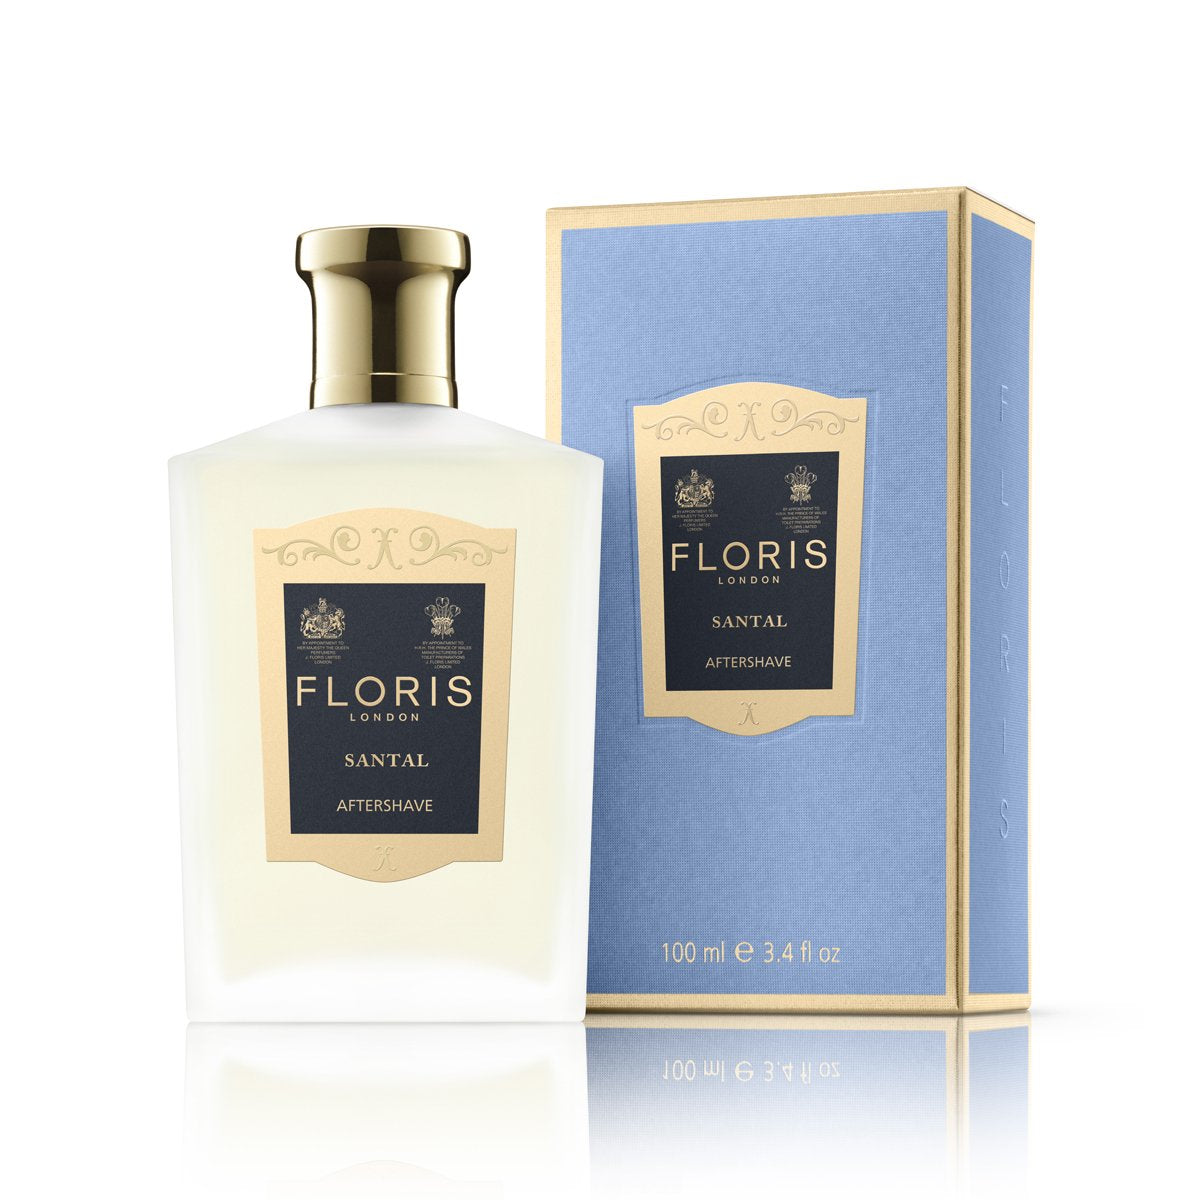 Floris london Santal aftershave in a frosted bottle next to a light blue packaging box with a navy blue and gold label attached.